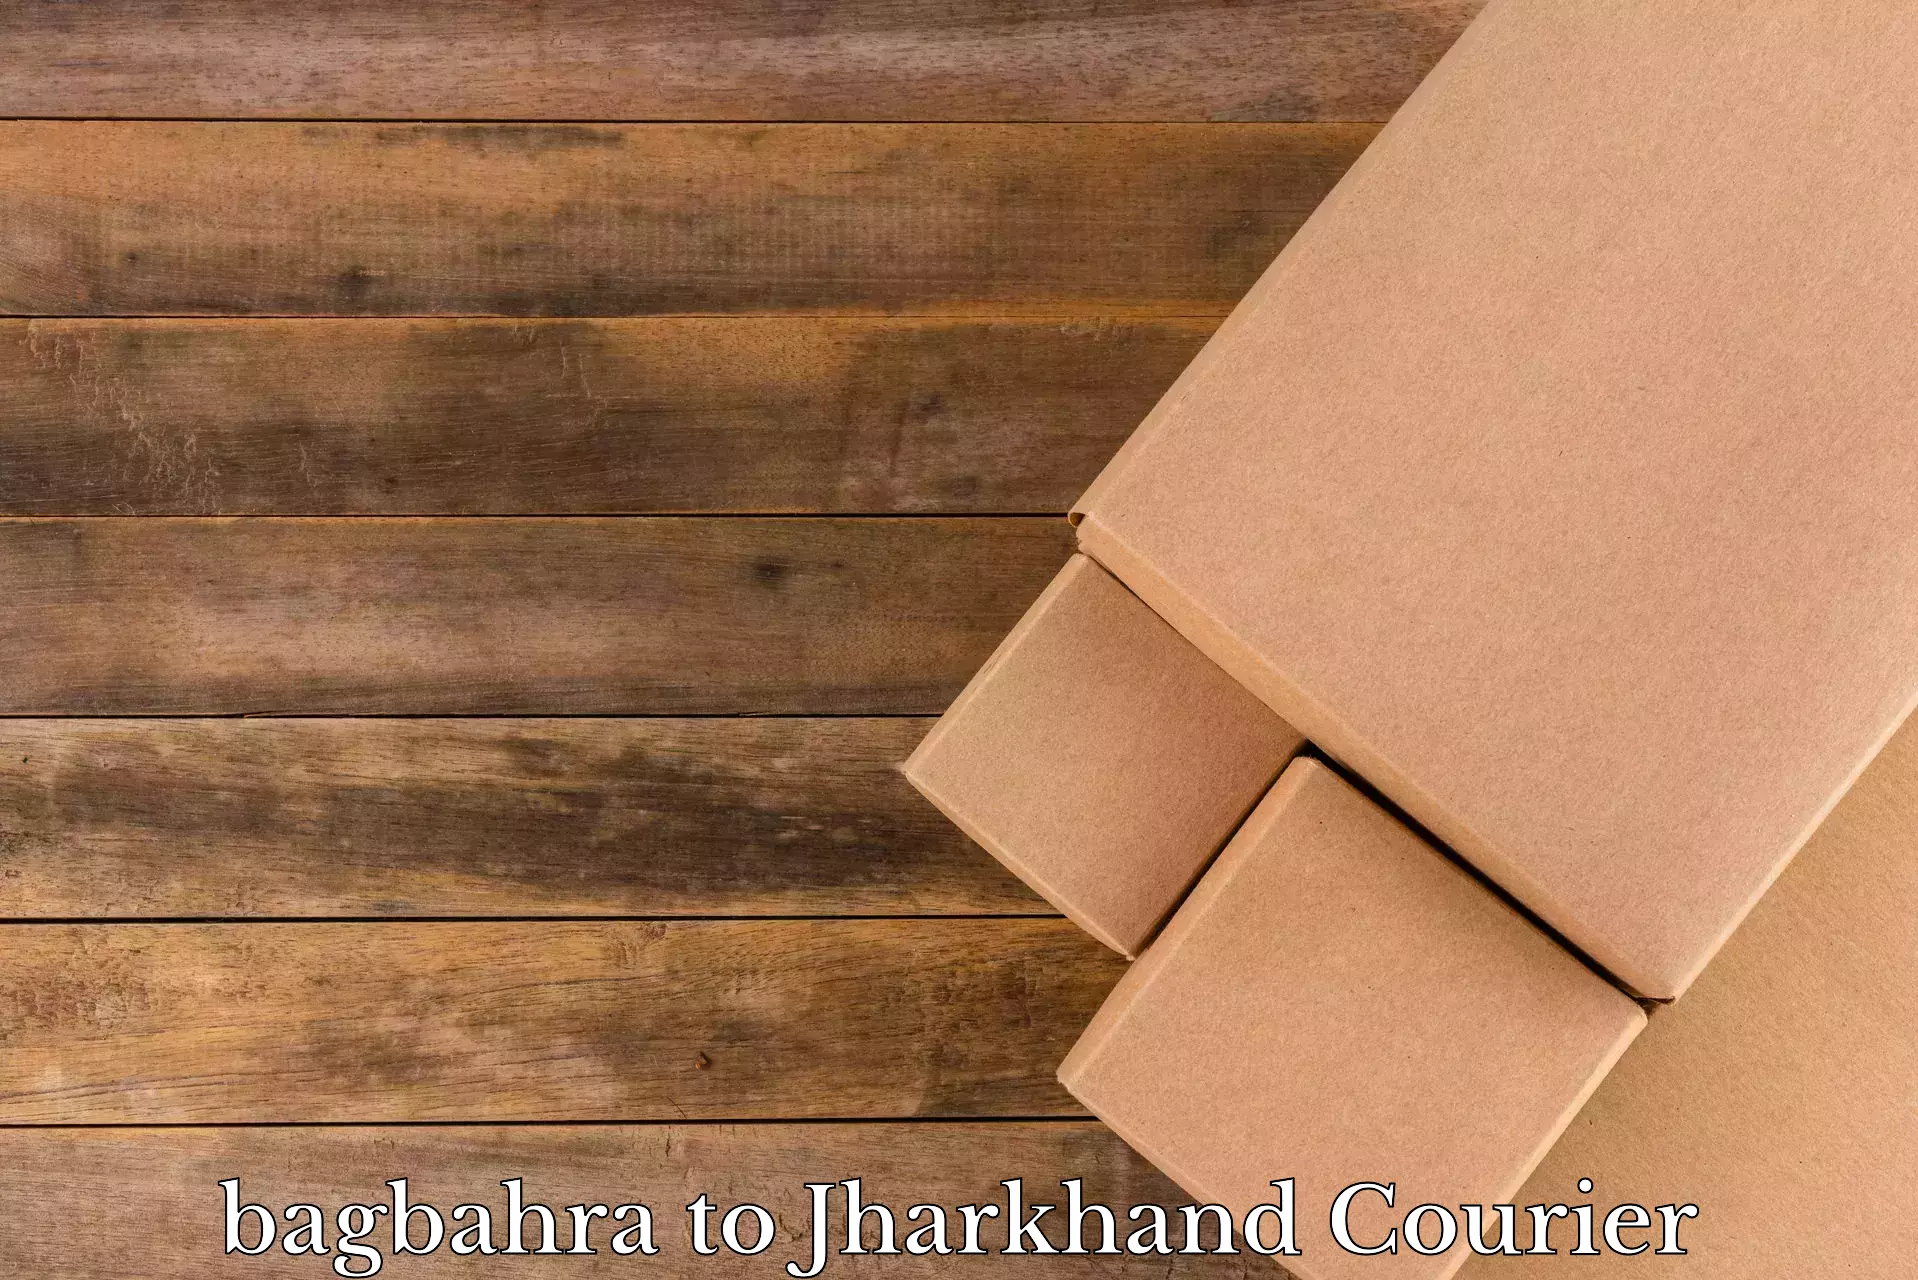 Home moving specialists bagbahra to Barharwa